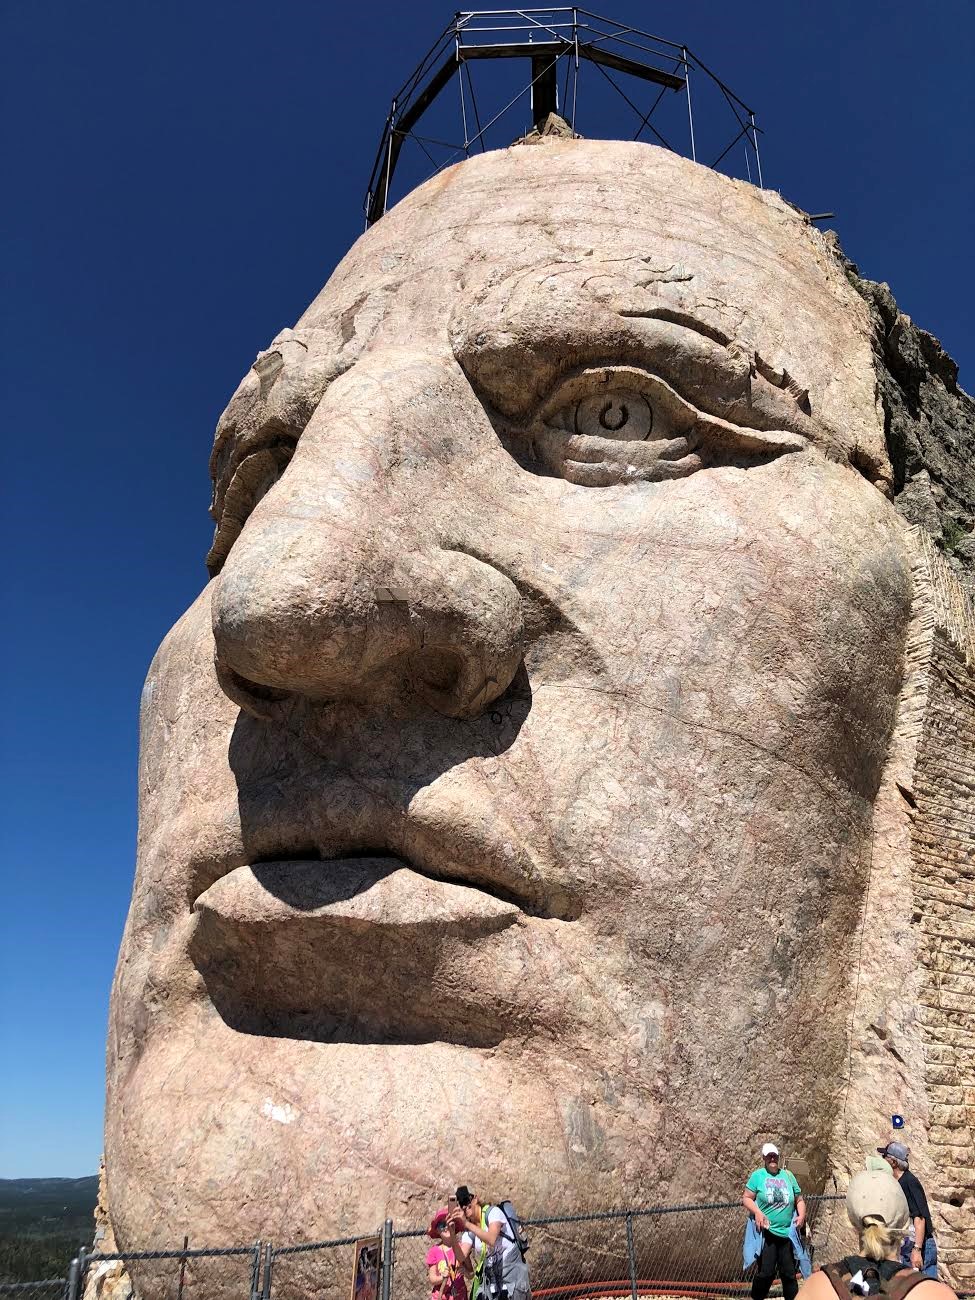 Up close and personal with Crazy Horse